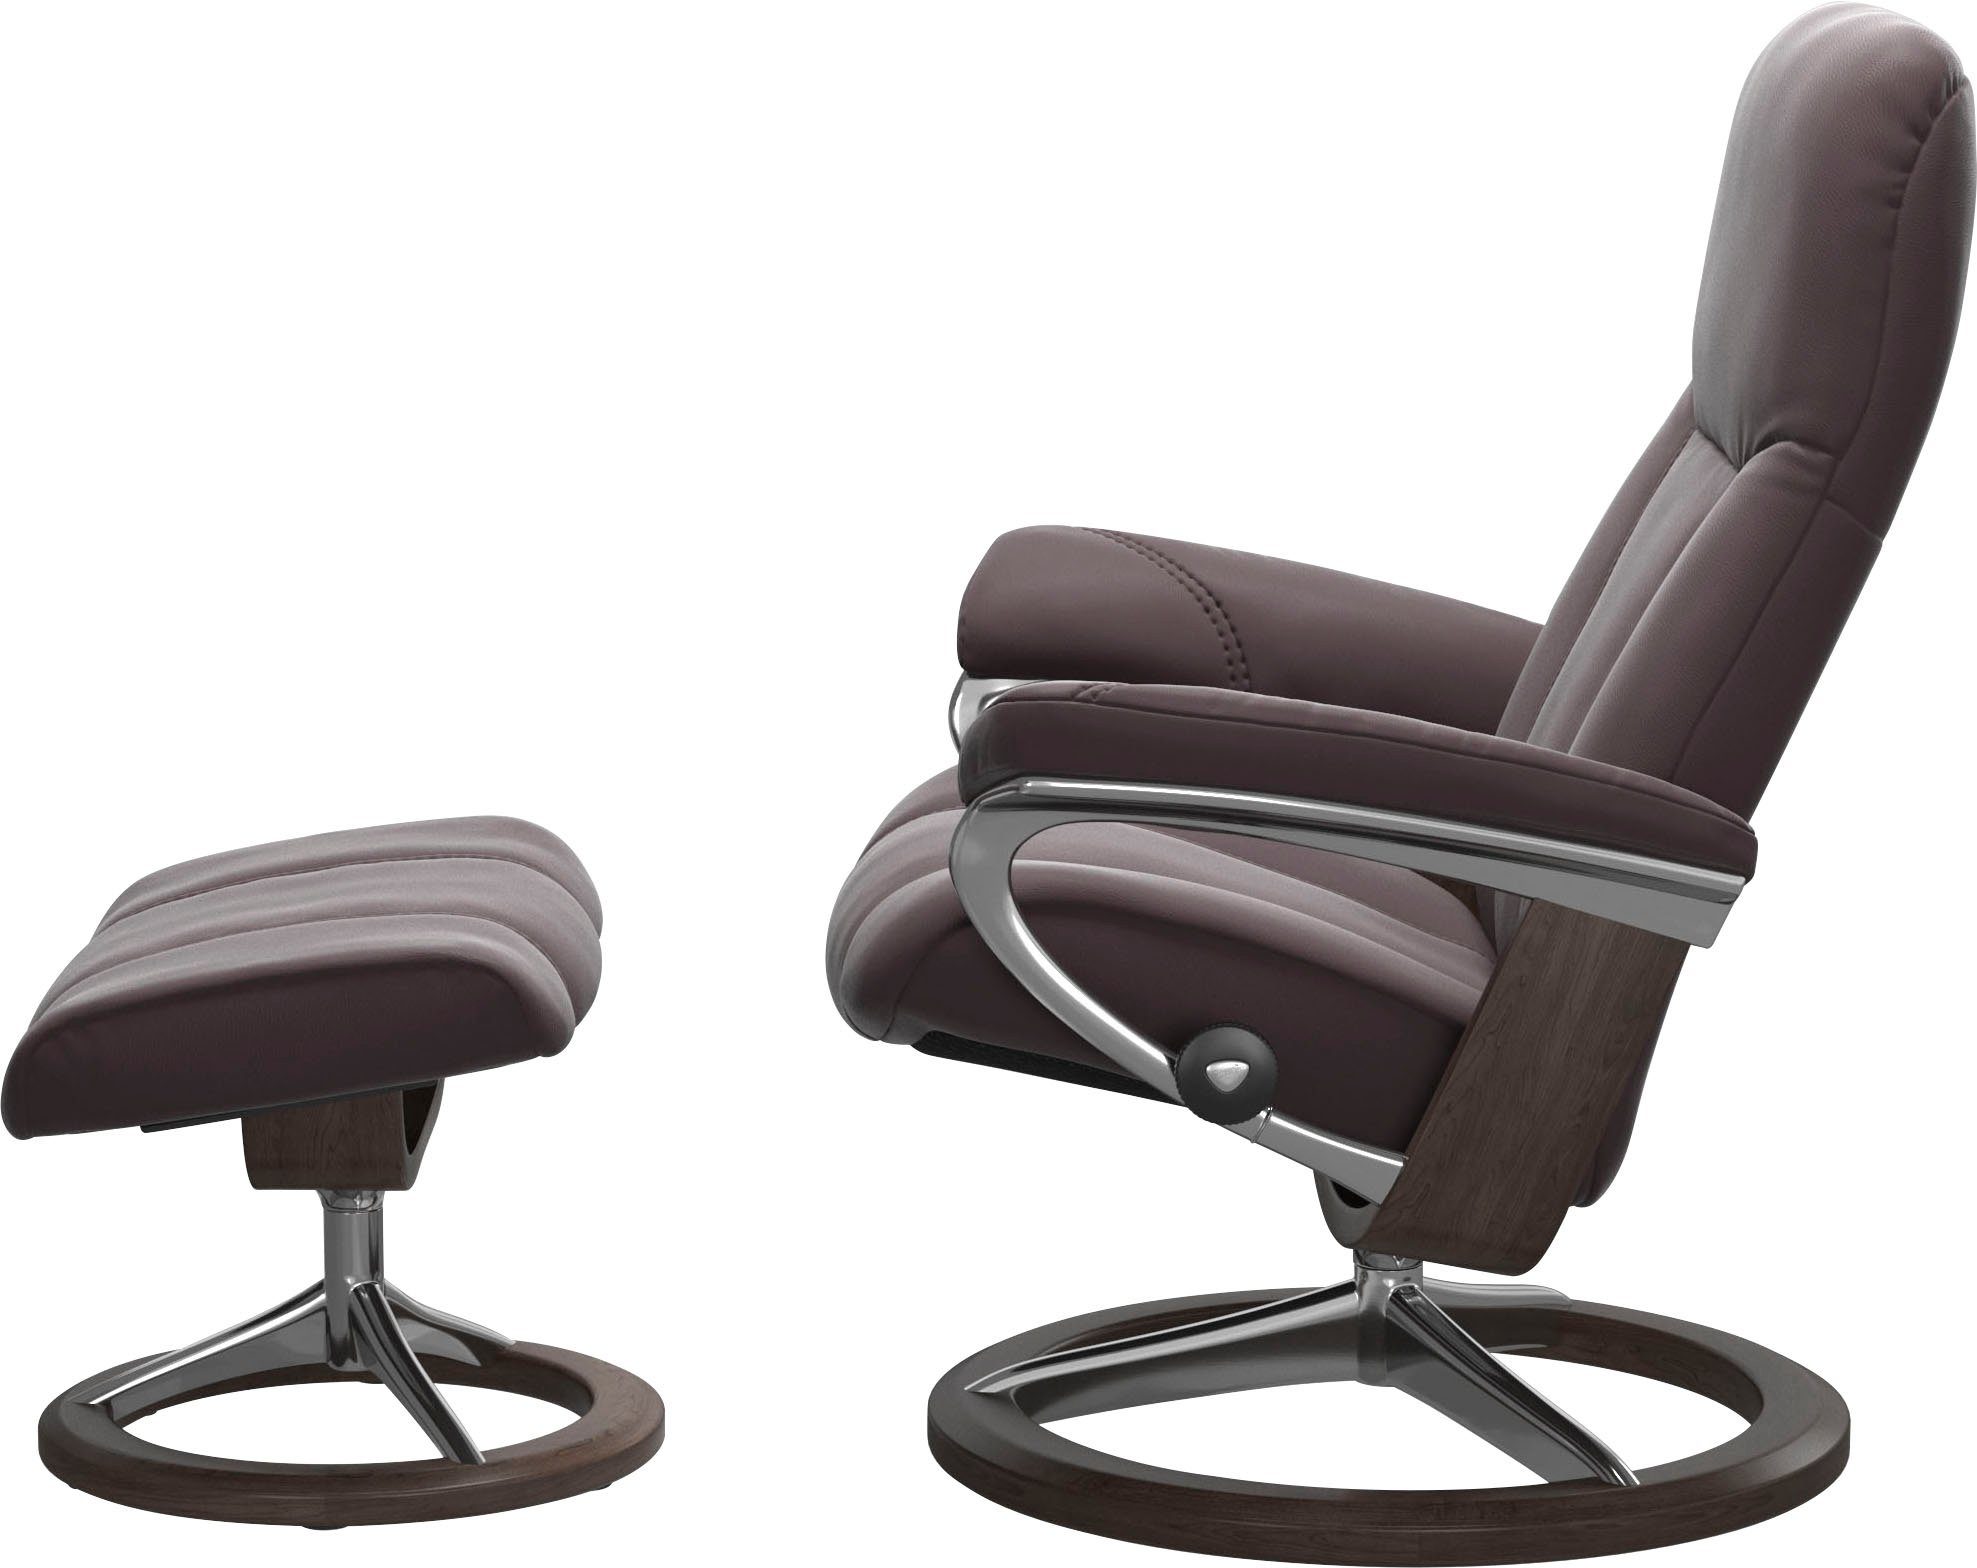 Stressless® Relaxsessel Consul, mit Signature Größe L, Wenge Gestell Base